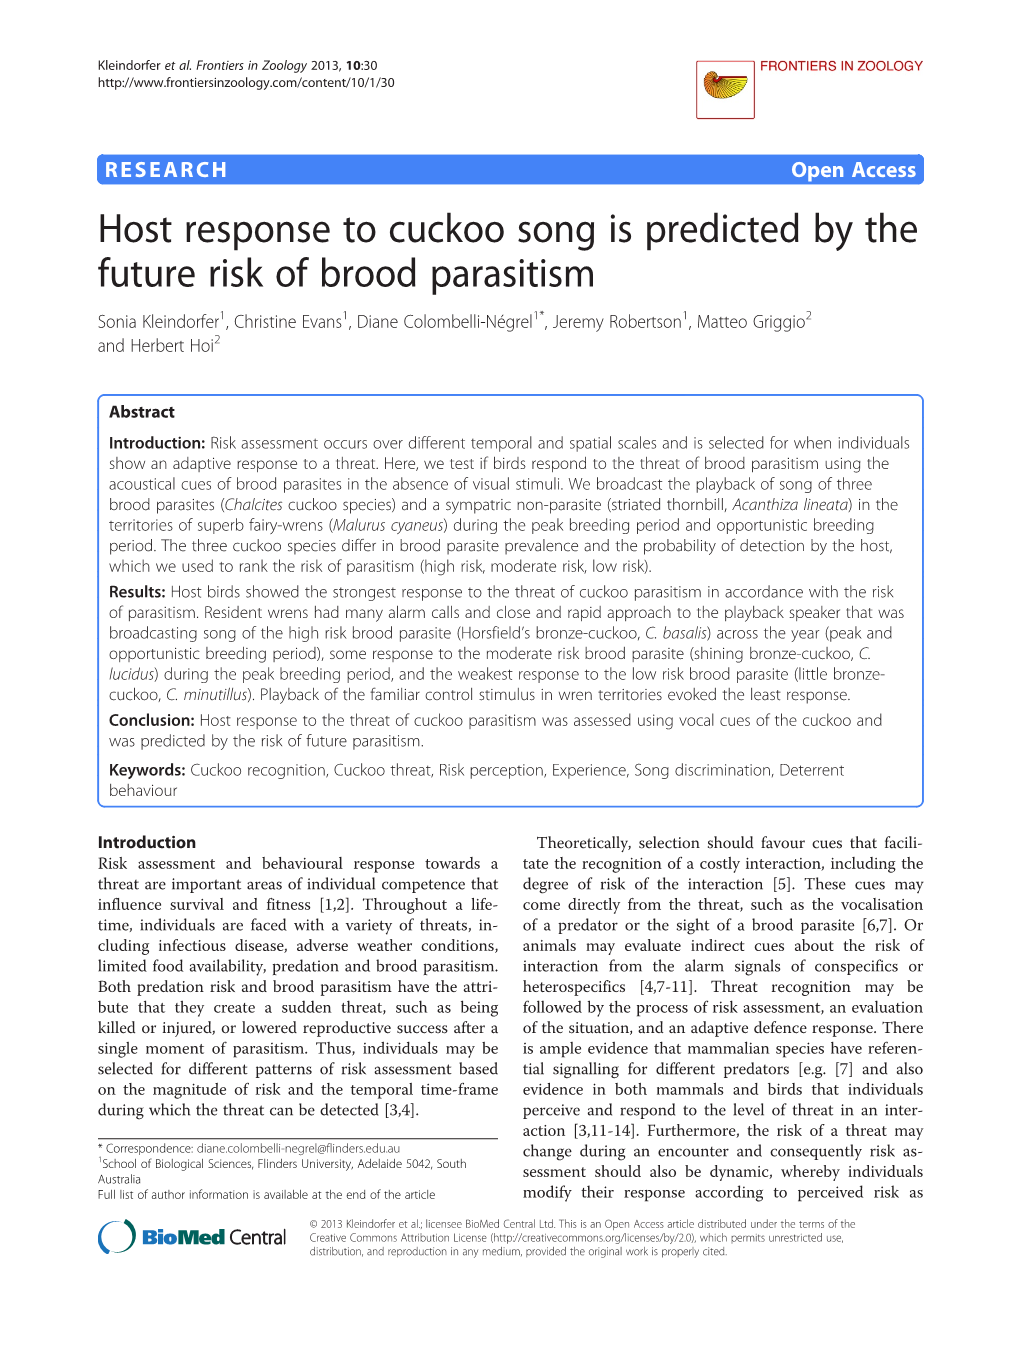 Host Response to Cuckoo Song Is Predicted by the Future Risk of Brood